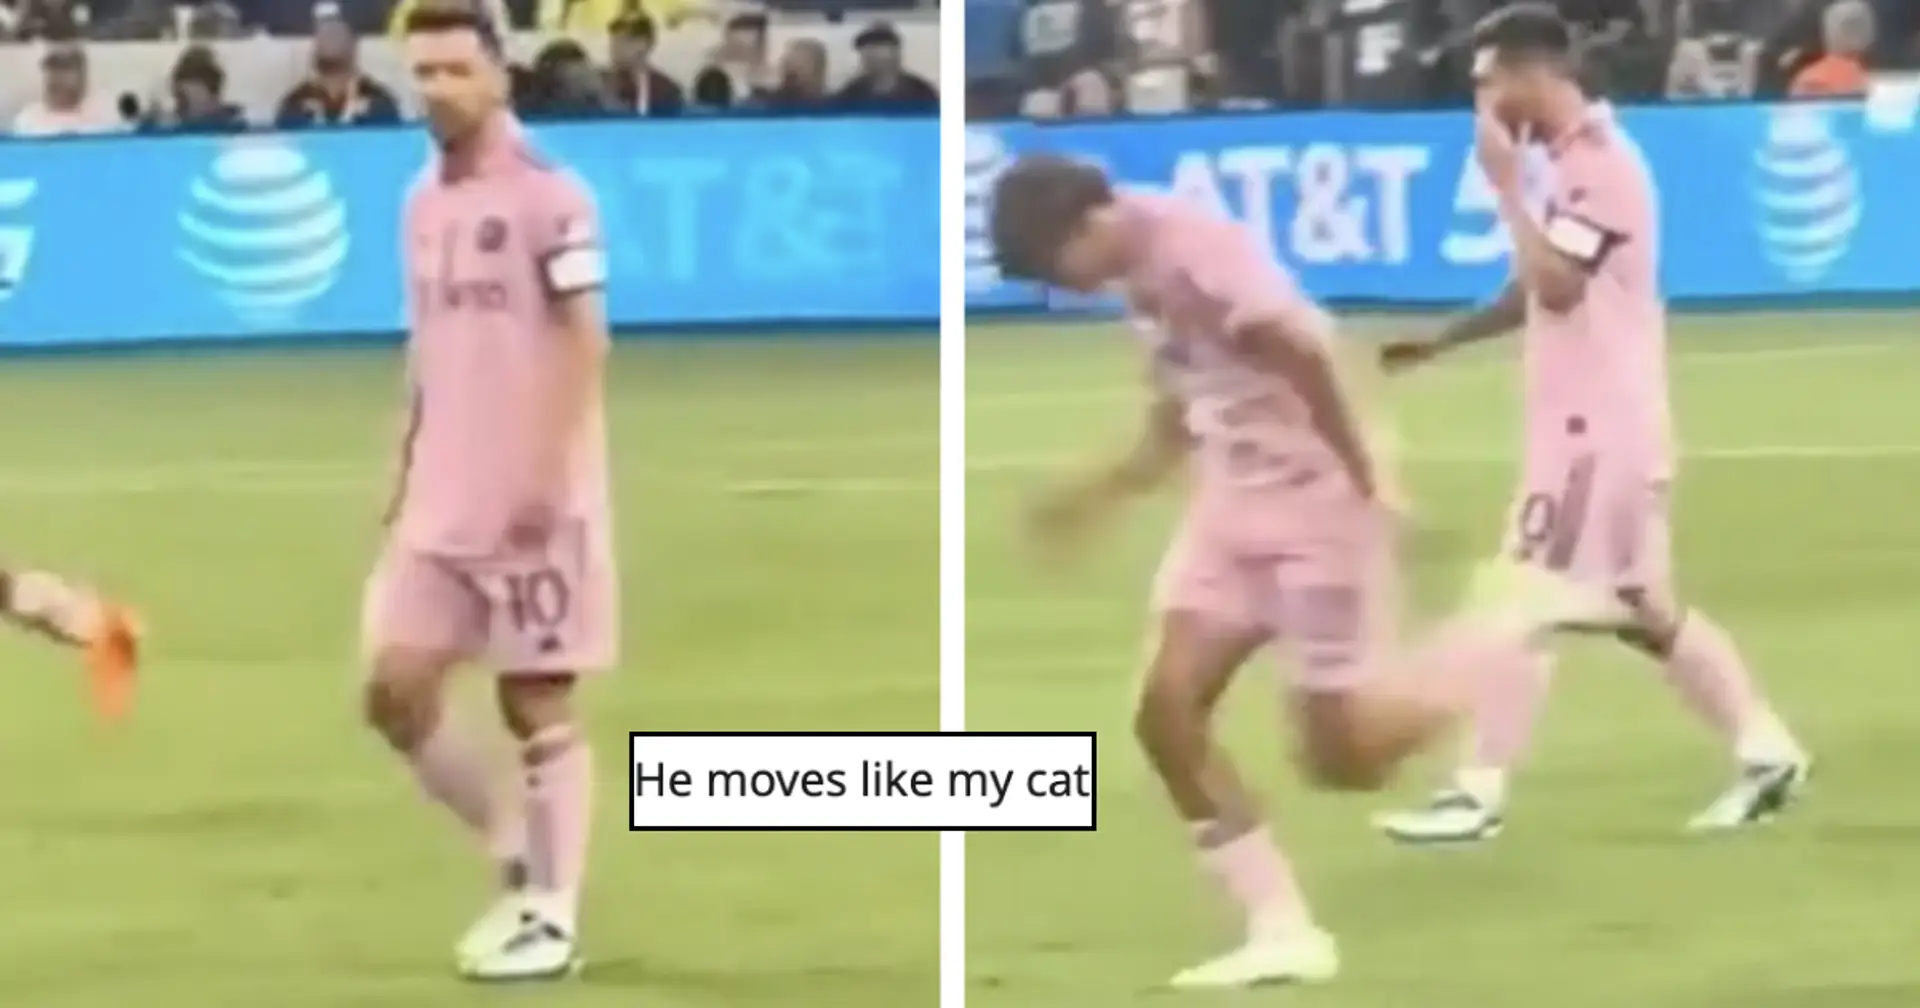 Messi's movement before latest Miami goal goes viral. Ronaldo fans annoyed!